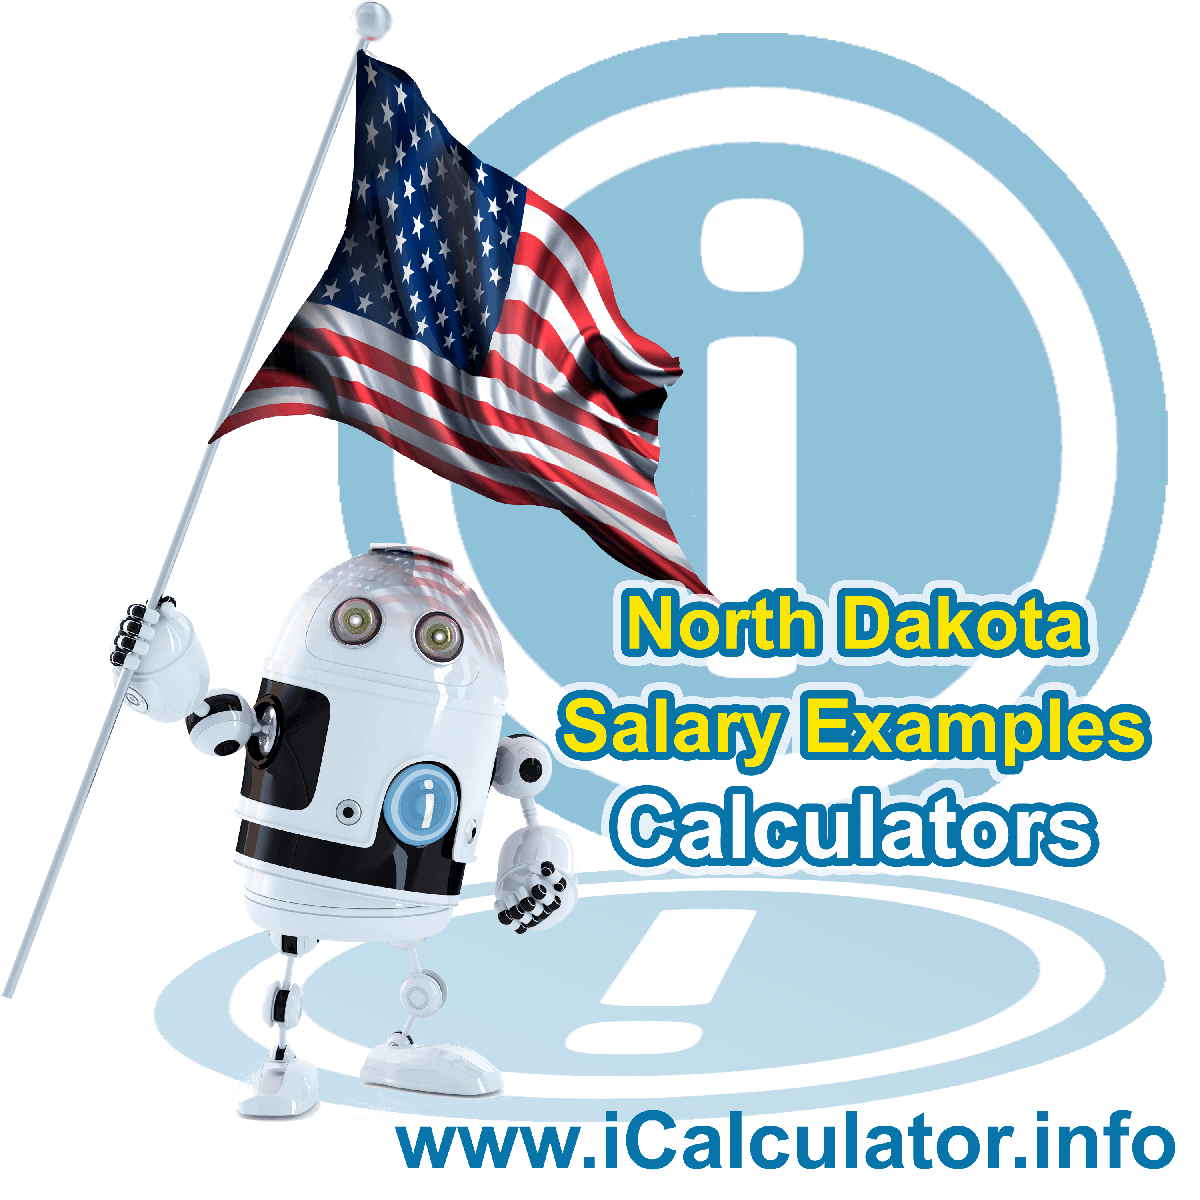 North Dakota Salary Example for $ 90,000.00 in 2023 | iCalculator™ | $ 90,000.00 salary example for employee and employer paying North Dakota State tincome taxes. Detailed salary after tax calculation including North Dakota State Tax, Federal State Tax, Medicare Deductions, Social Security, Capital Gains and other income tax and salary deductions complete with supporting North Dakota state tax tables 